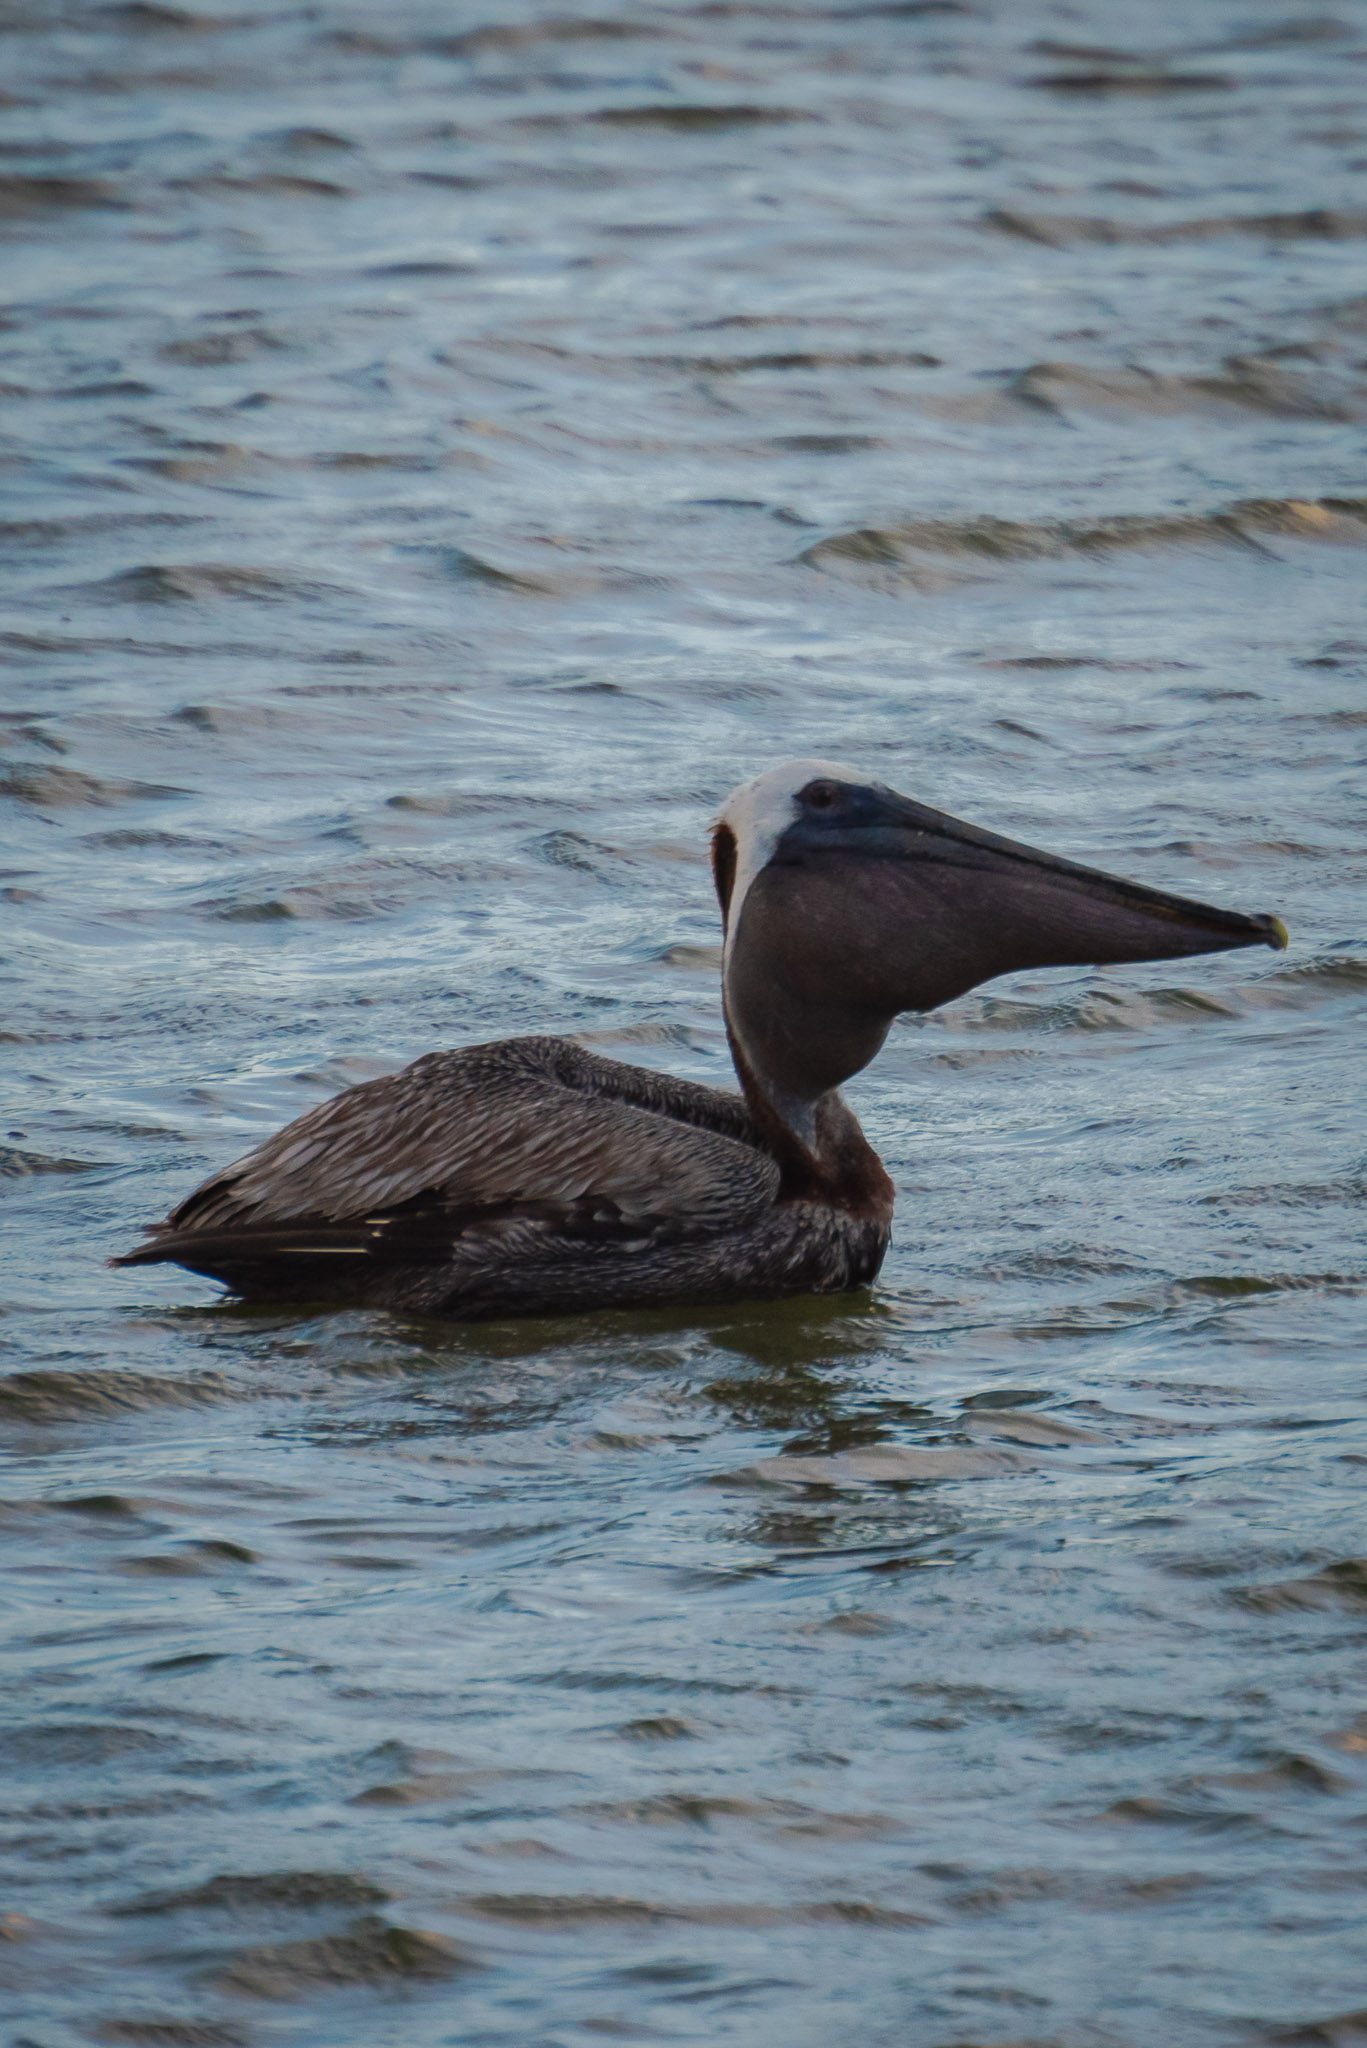 Brown pelican sitting on the water and swallowing a fish in Merritt Island National Wildlife Refuge